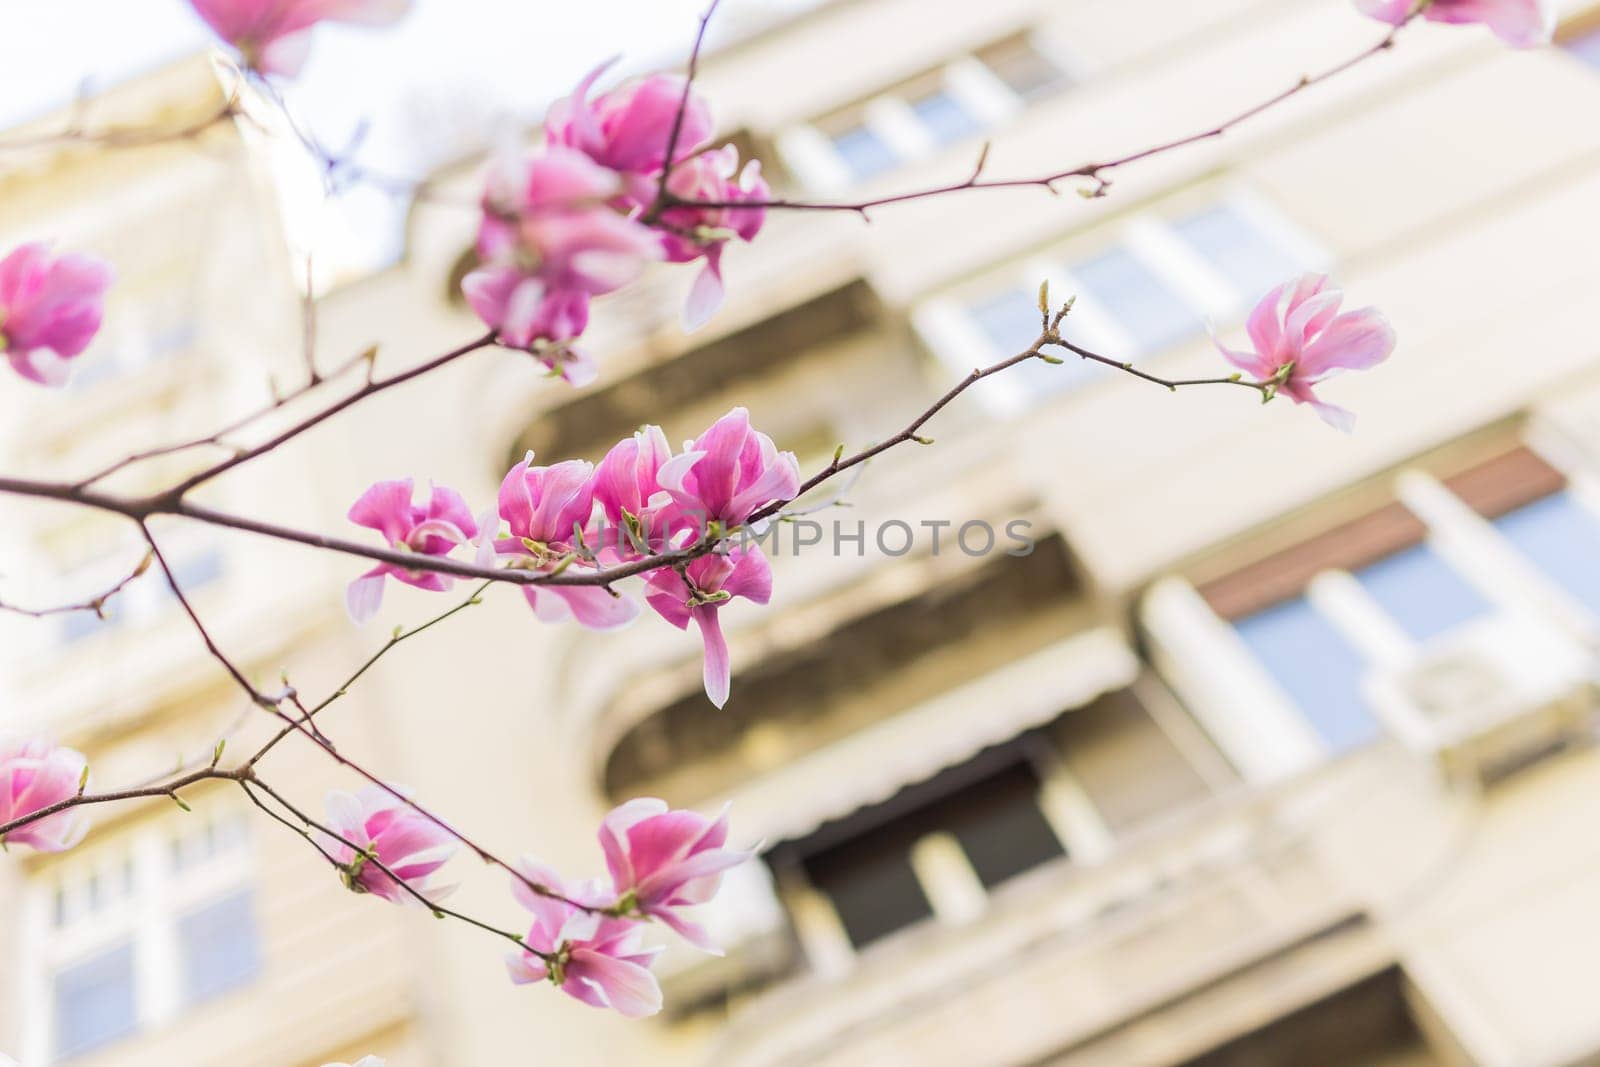 Blooming pink magnolias on the streets and in the courtyards of houses. Magnolia tree with pink flowers by Satura86